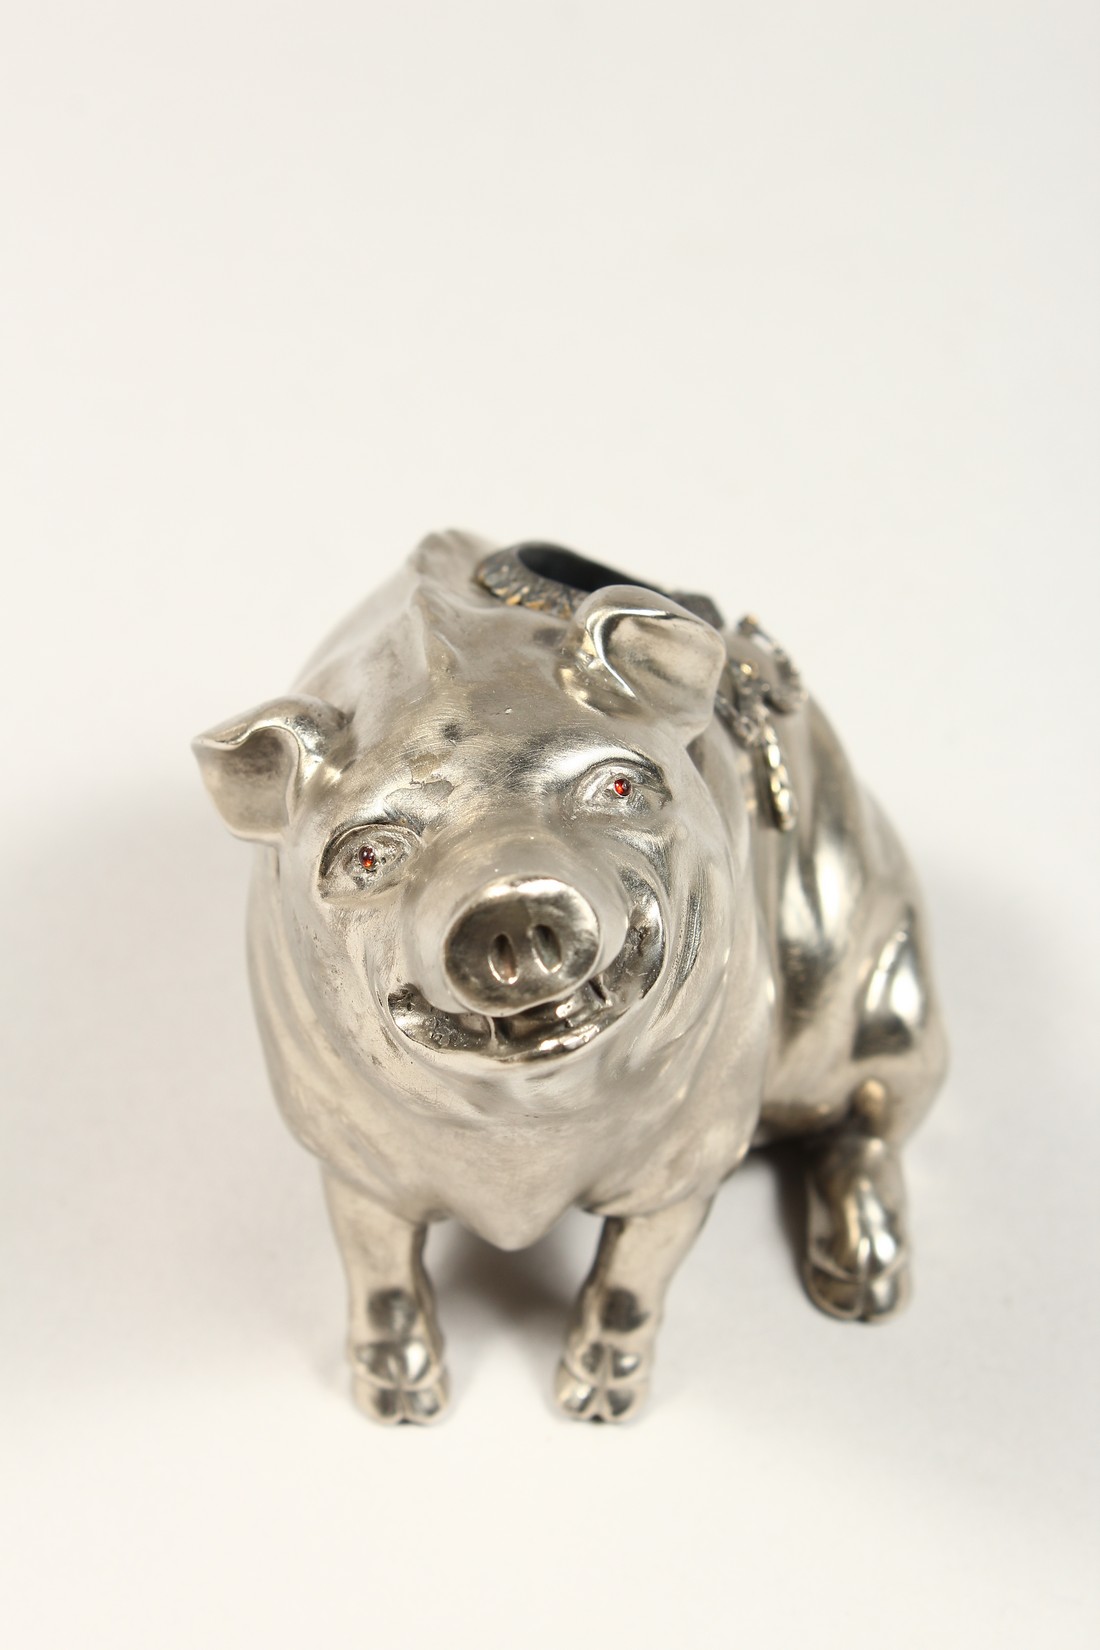 A SUPERB RUSSIAN SILVER SEATED PIG MATCH HOLDER 3.75ins high, 4.5ins long With Faberge mark. - Image 2 of 6